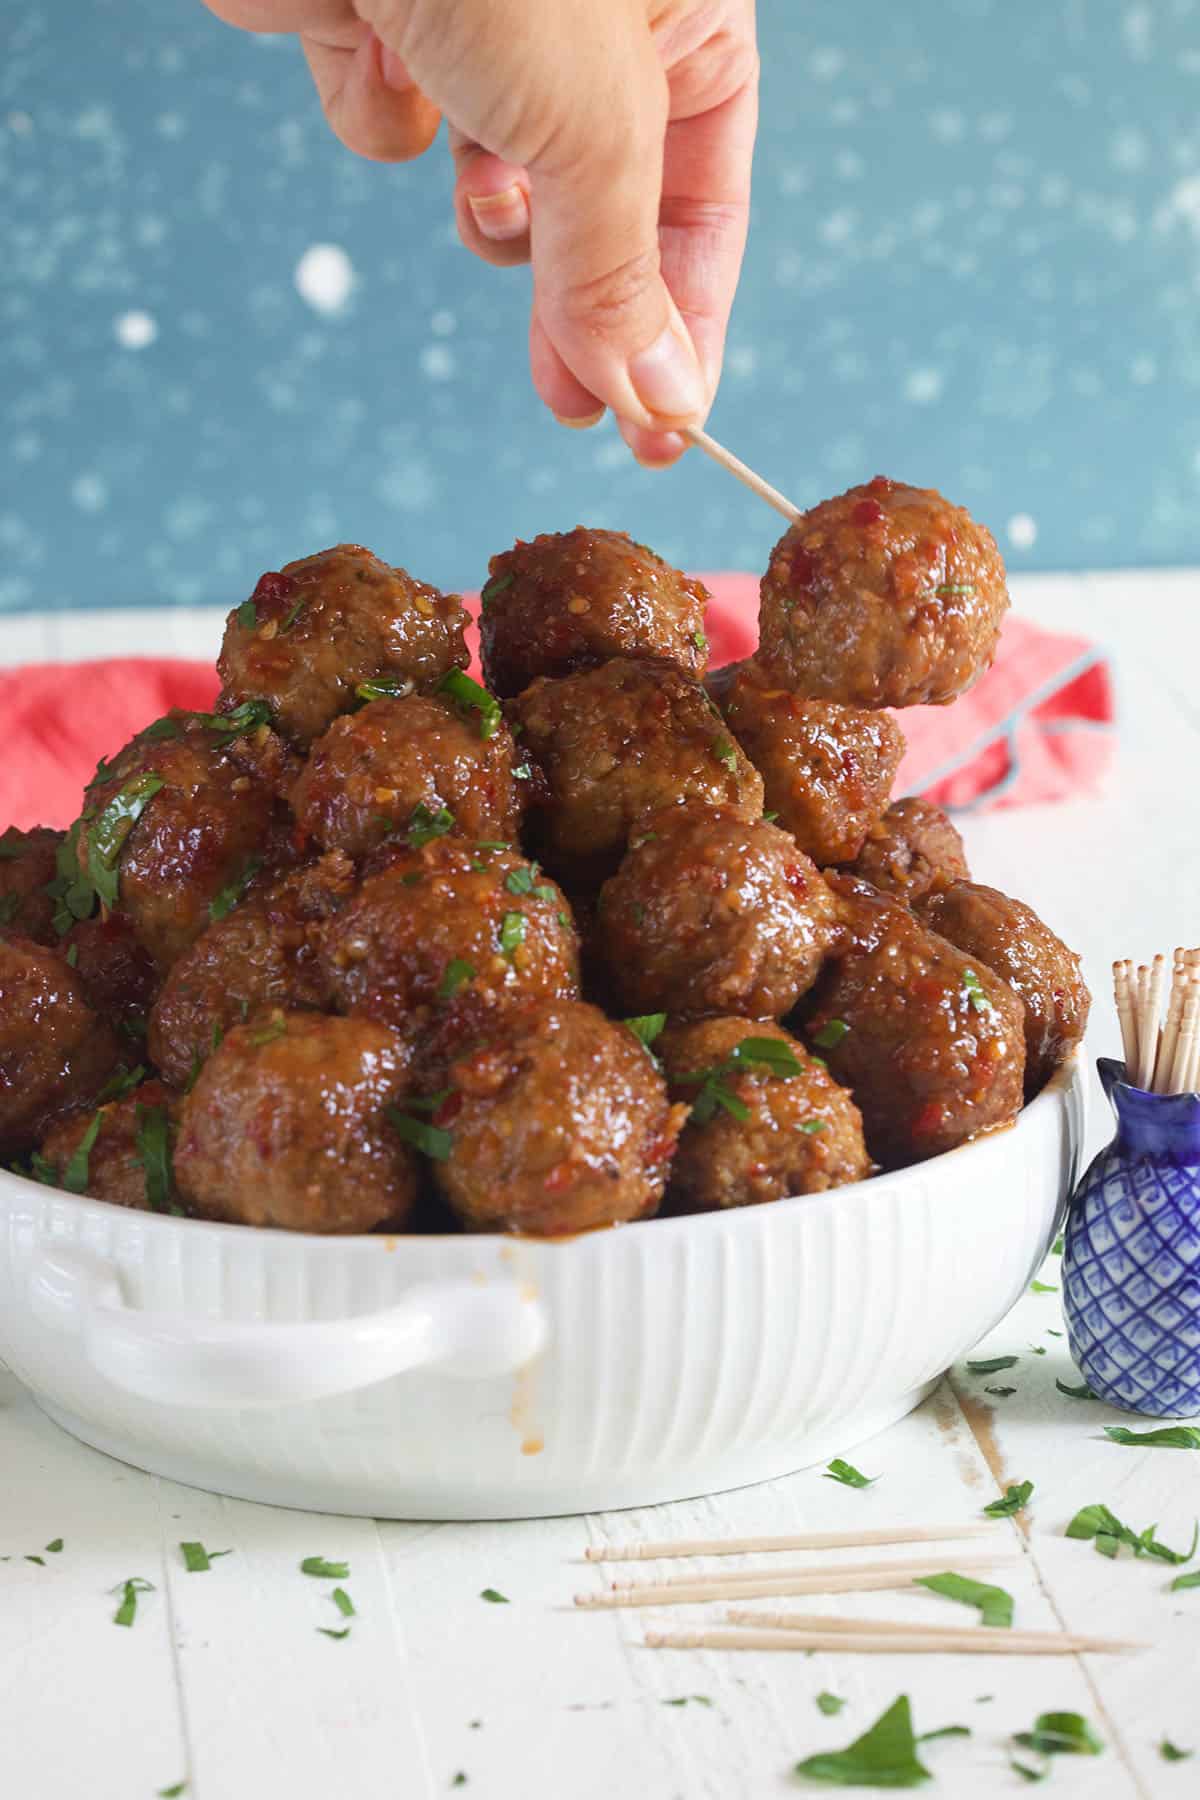 A hand is lifting a meatball from a full bowl using a toothpick. 